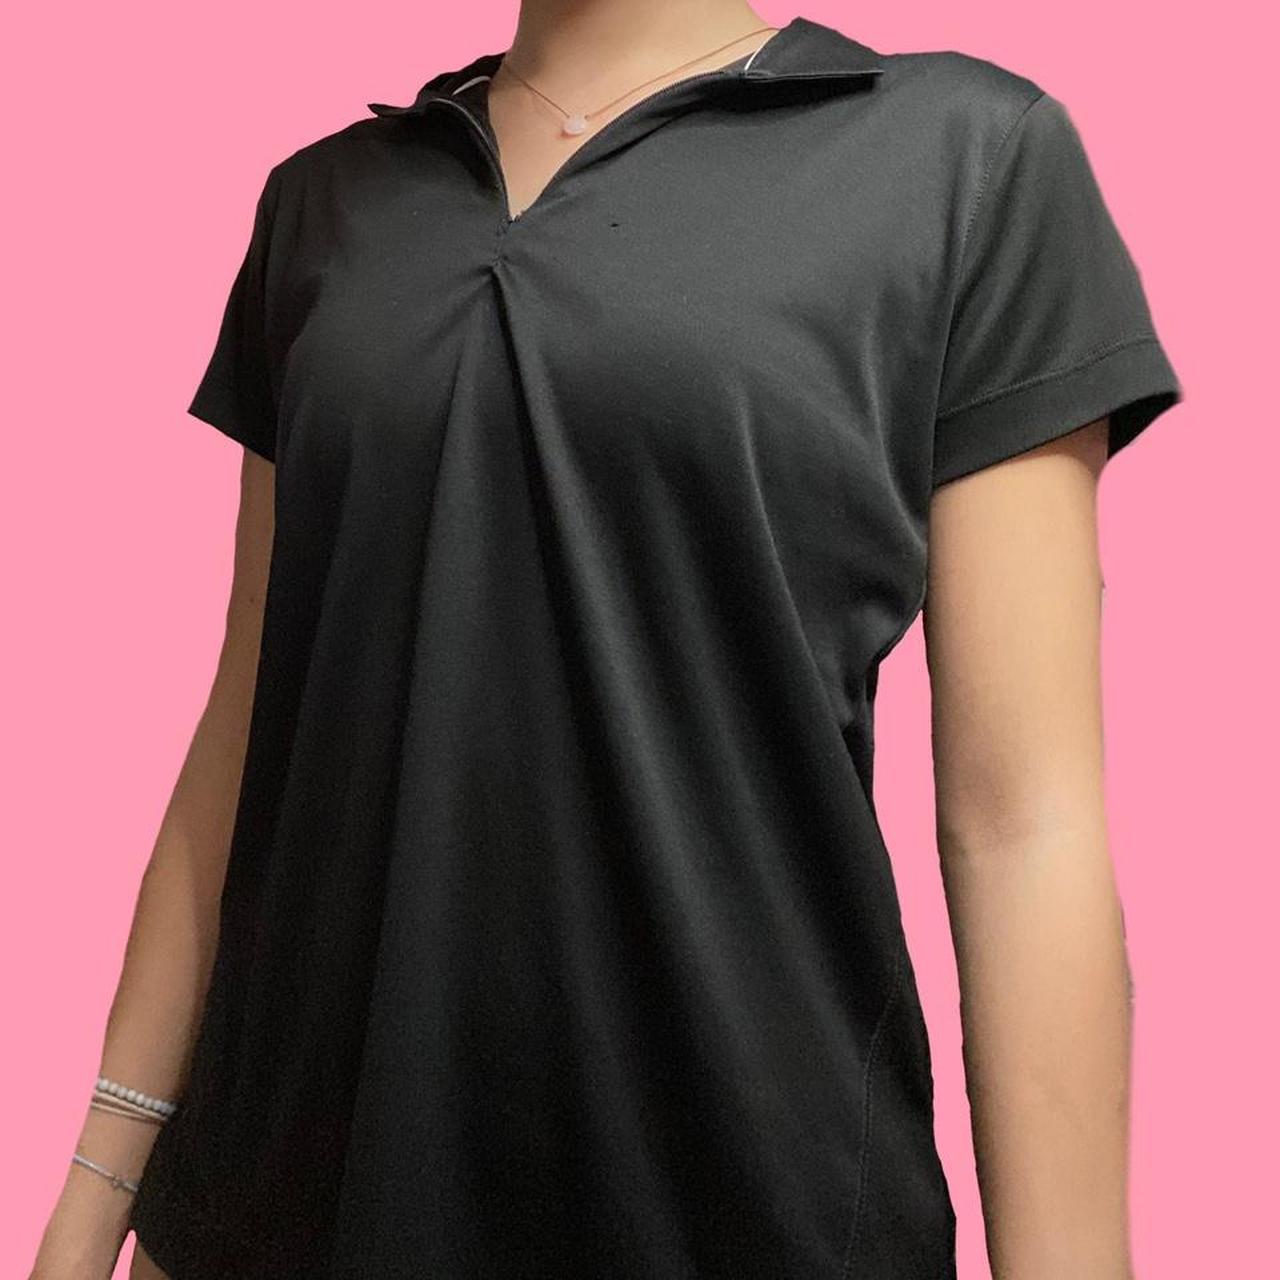 Product Image 1 - black golf/athletic shirt 

-suuuper comfortable